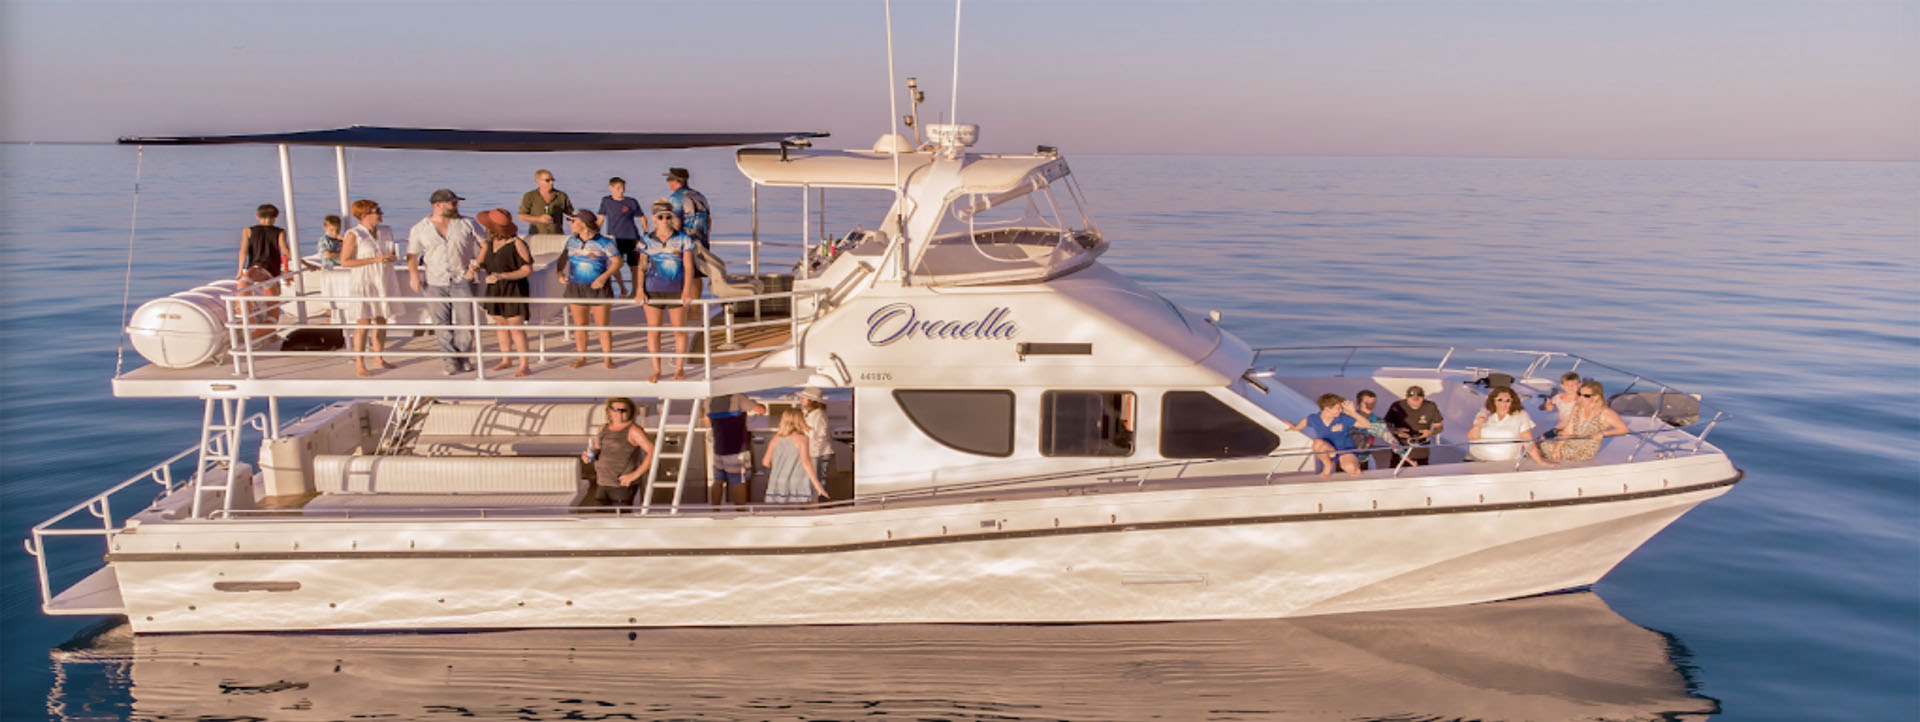 ORCAELLA-boat-whale-watching-broome